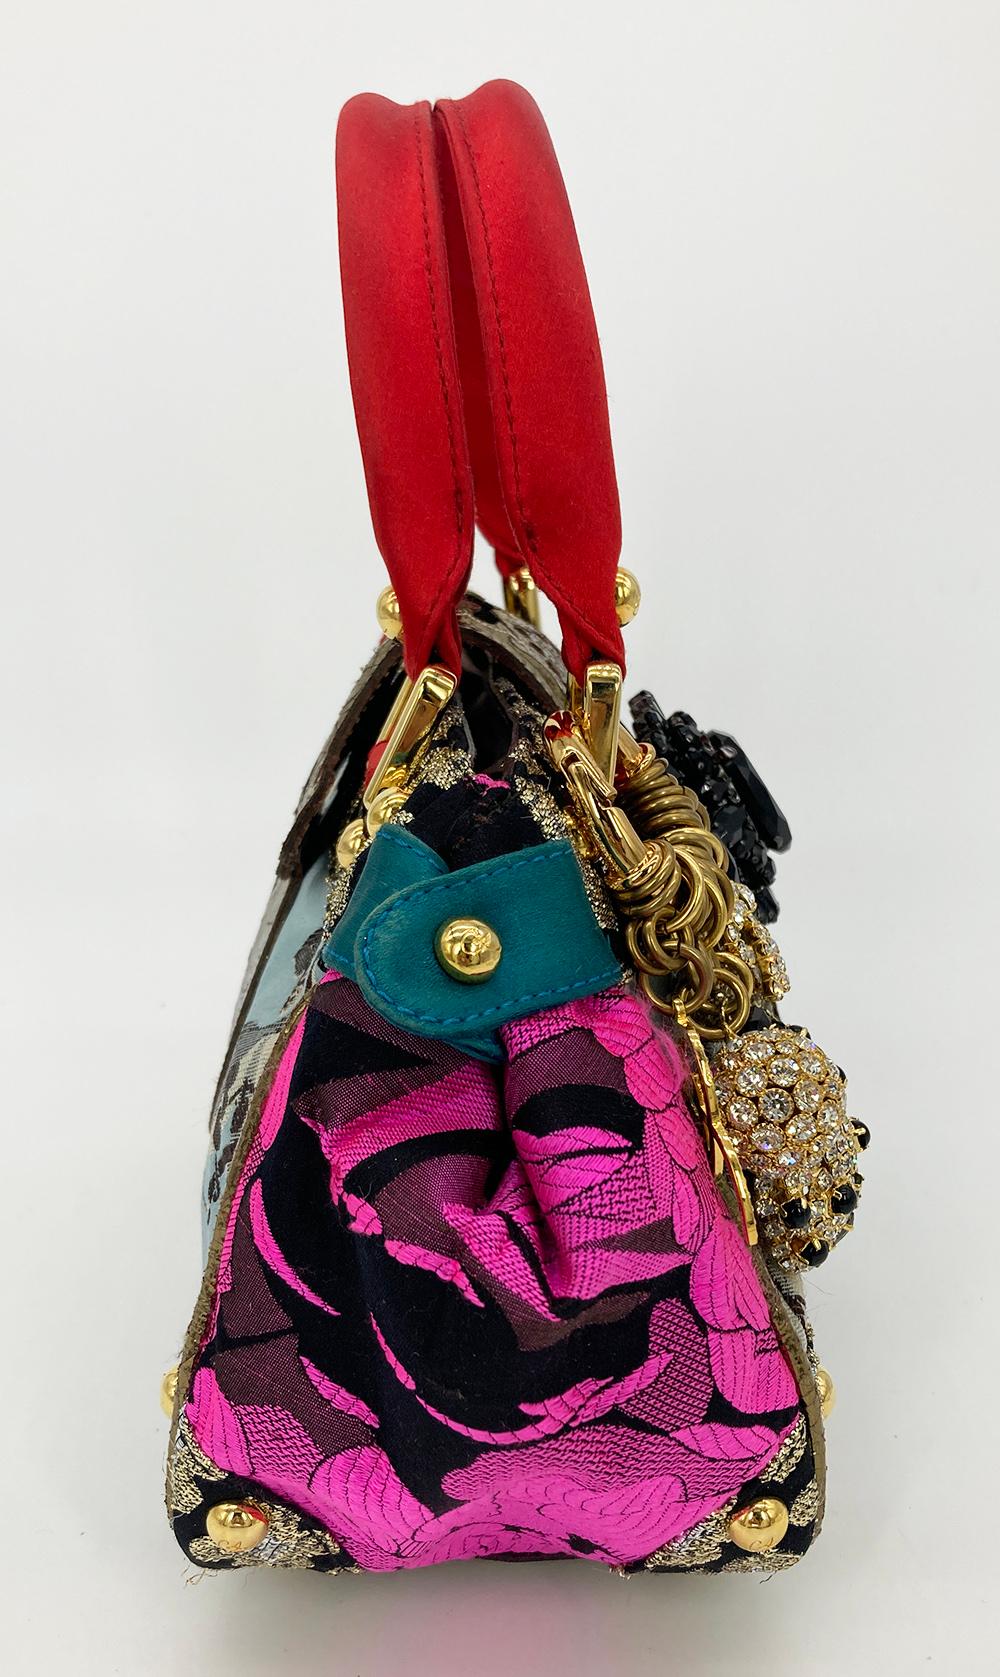 Christian Lacroix Embroidered Silk Crystal Charm Embellished Handbag in good condition. multi color silk exterior with various brocade fabrics, metallic embroidery, bronze leather piped edges, red silk handles, gold hardware and crystal covered